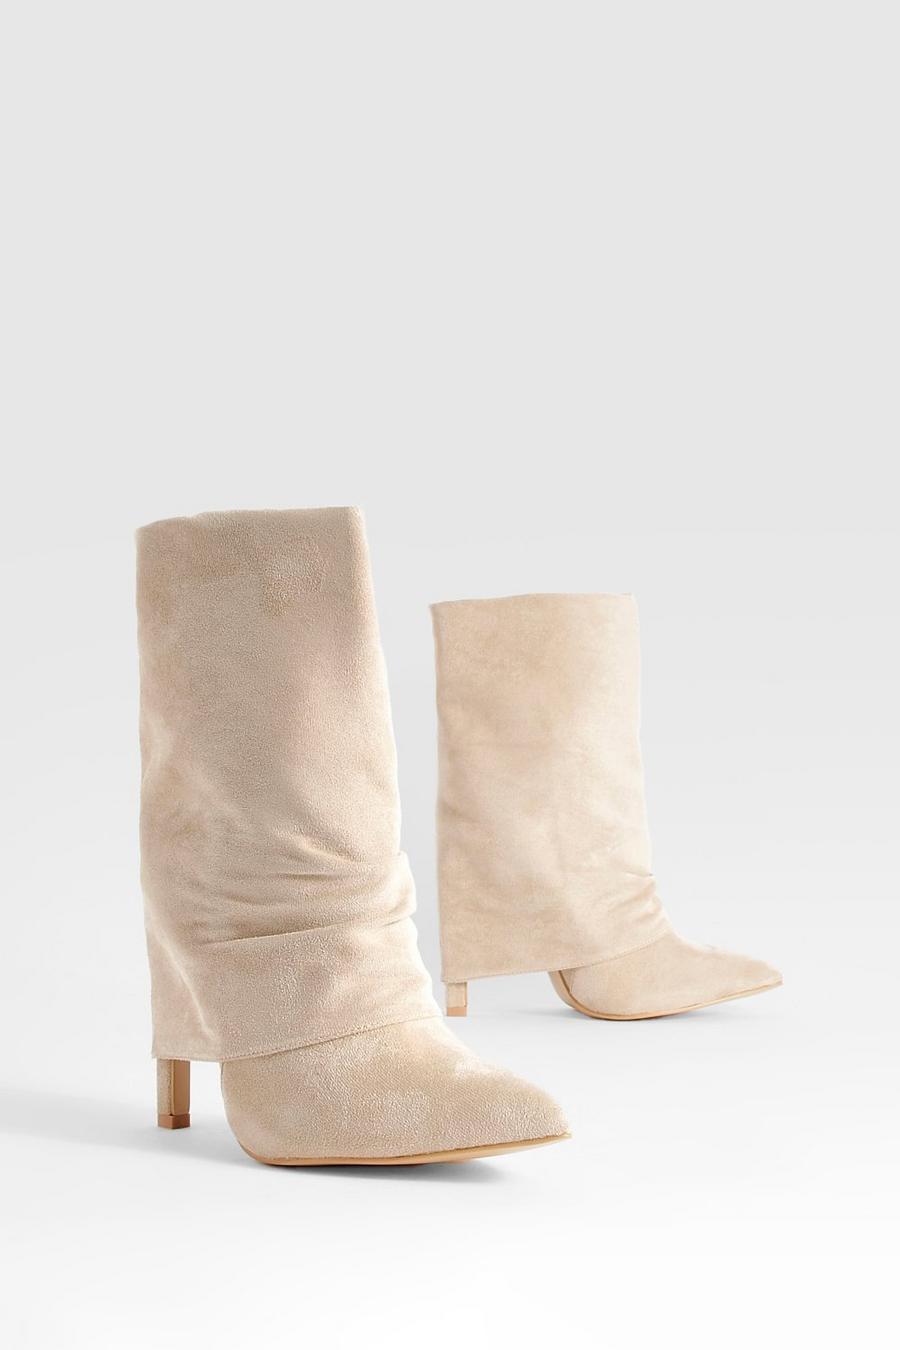 Beige Wide Width Calf High Fold Over Stiletto Pointed Boots